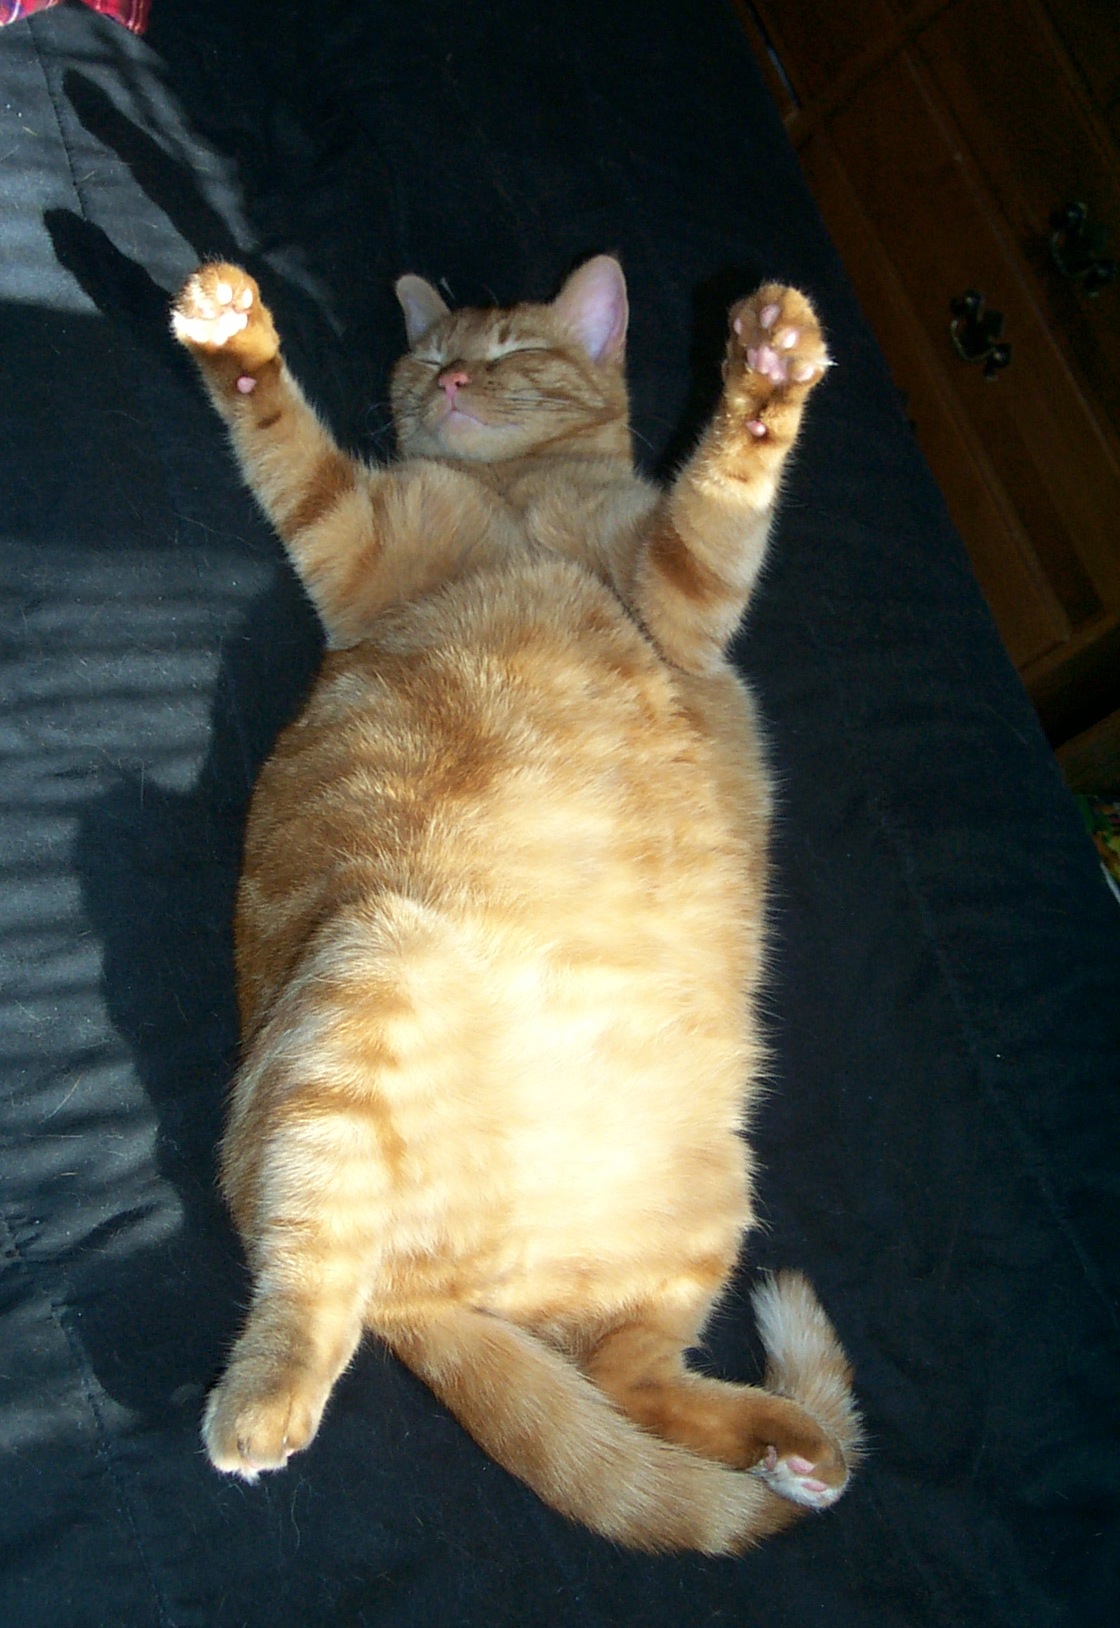 Fat Red Cat.jpg Commons